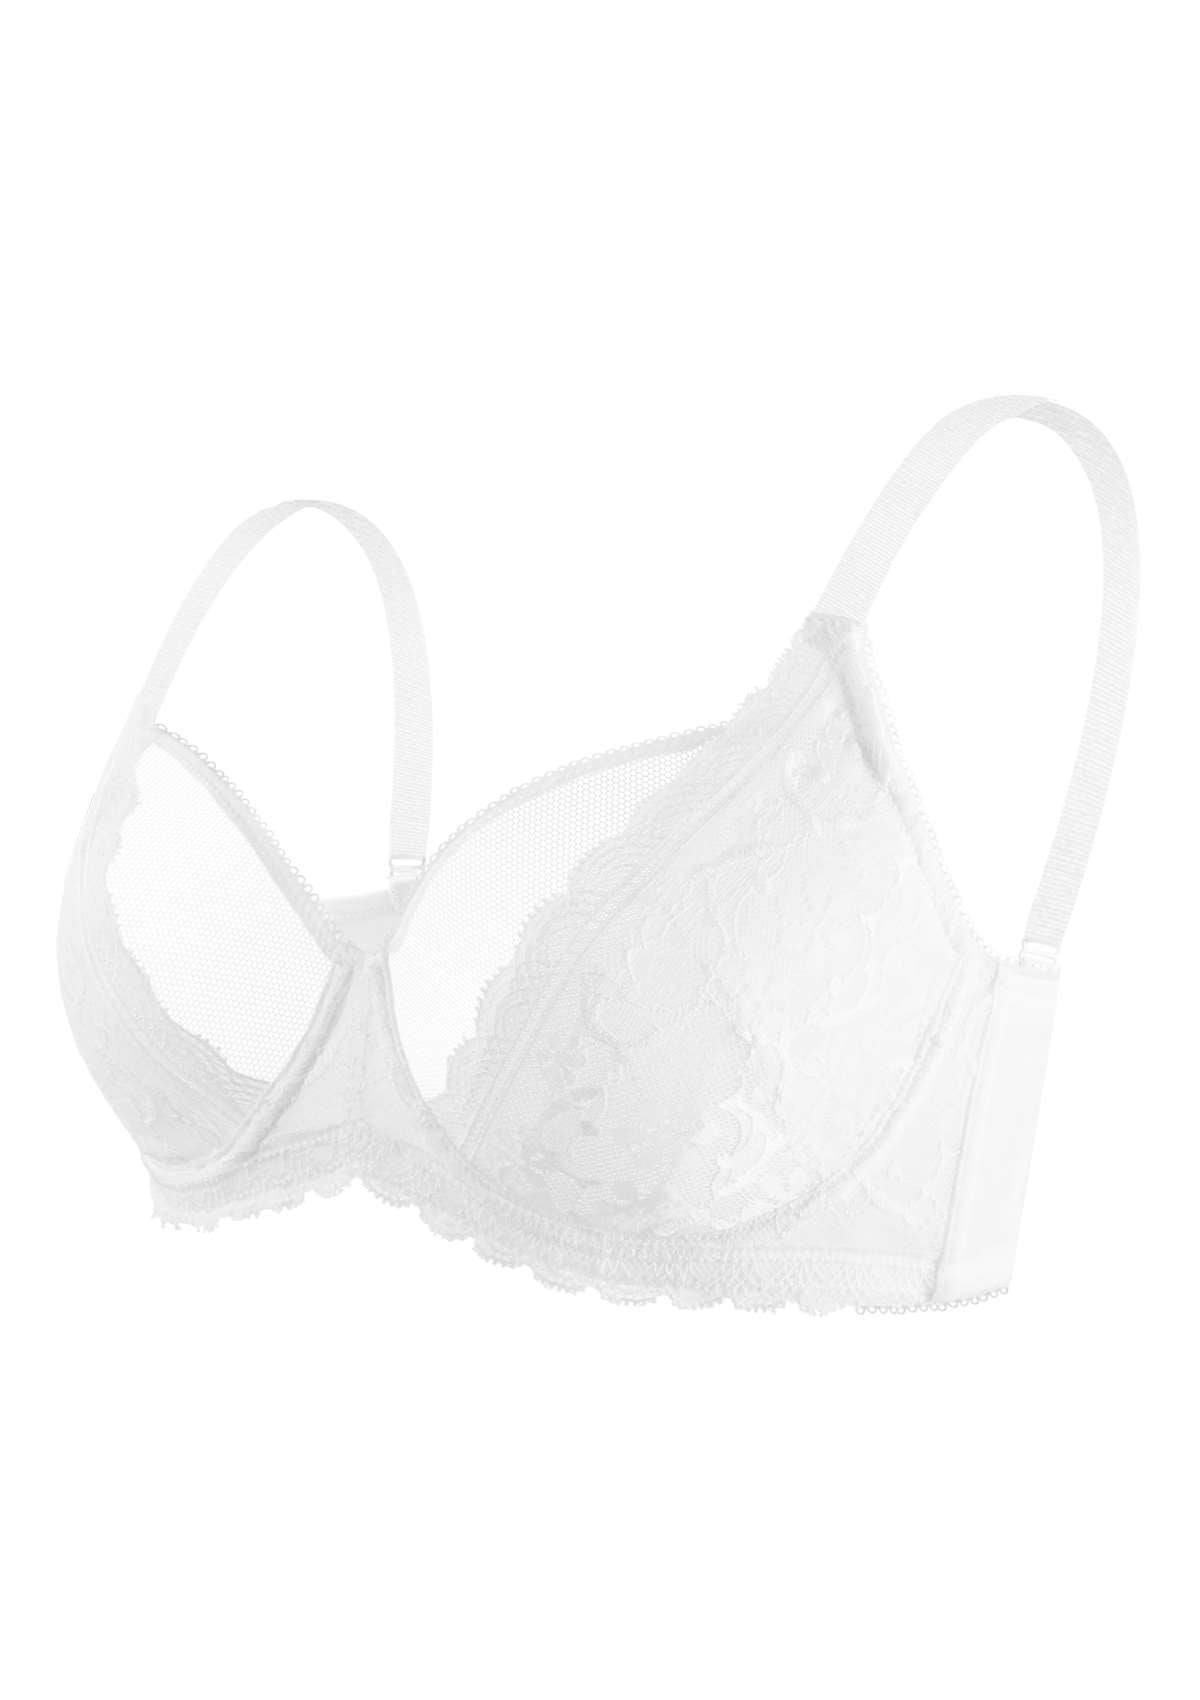 HSIA Anemone Big Bra: Best Bra For Lift And Support, Floral Bra - Black / 42 / DD/E